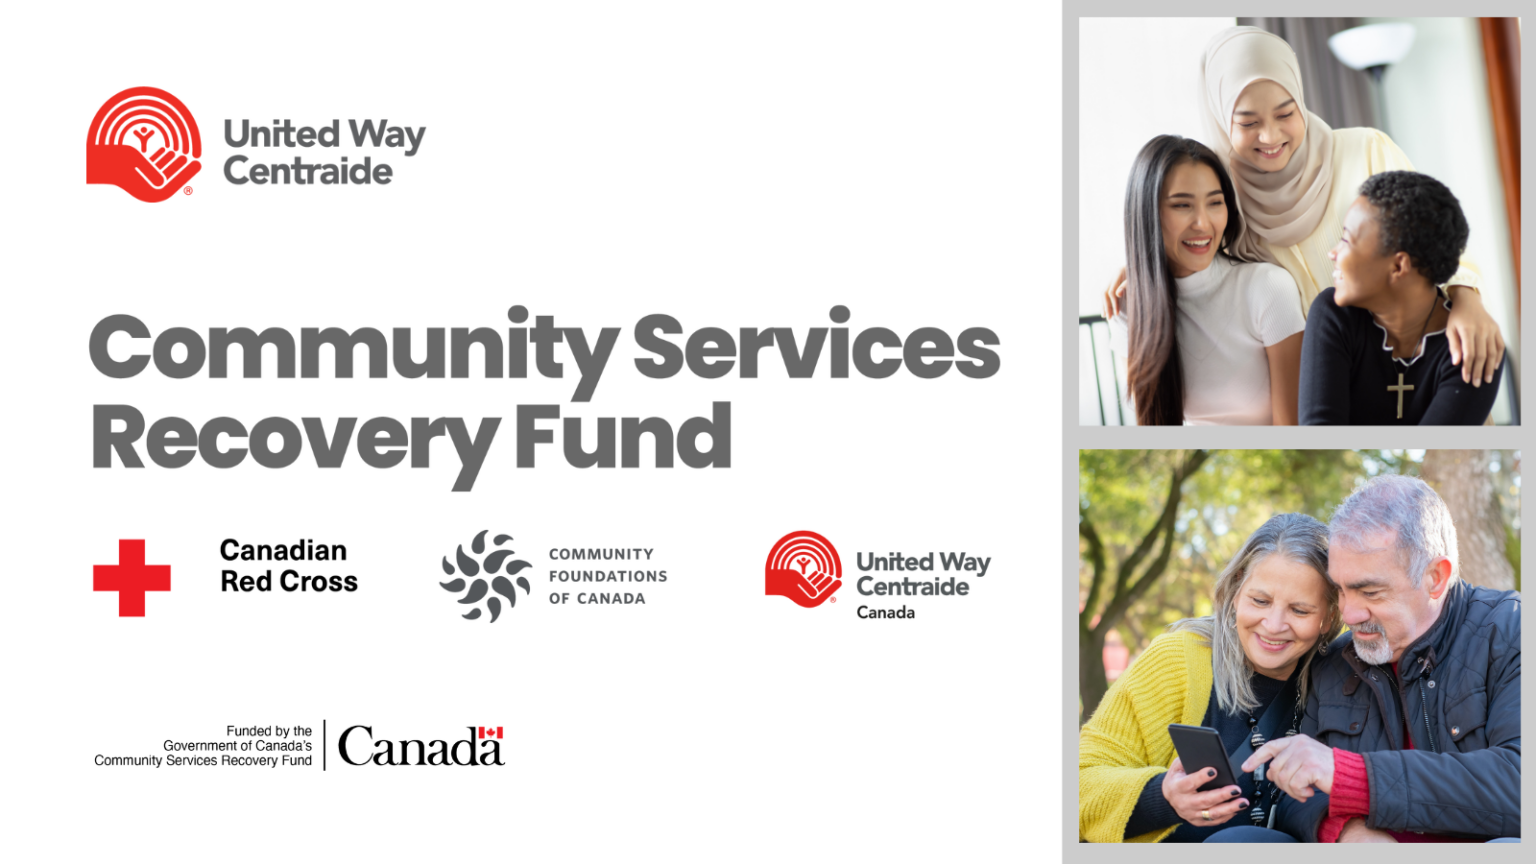 Community services recovery fund